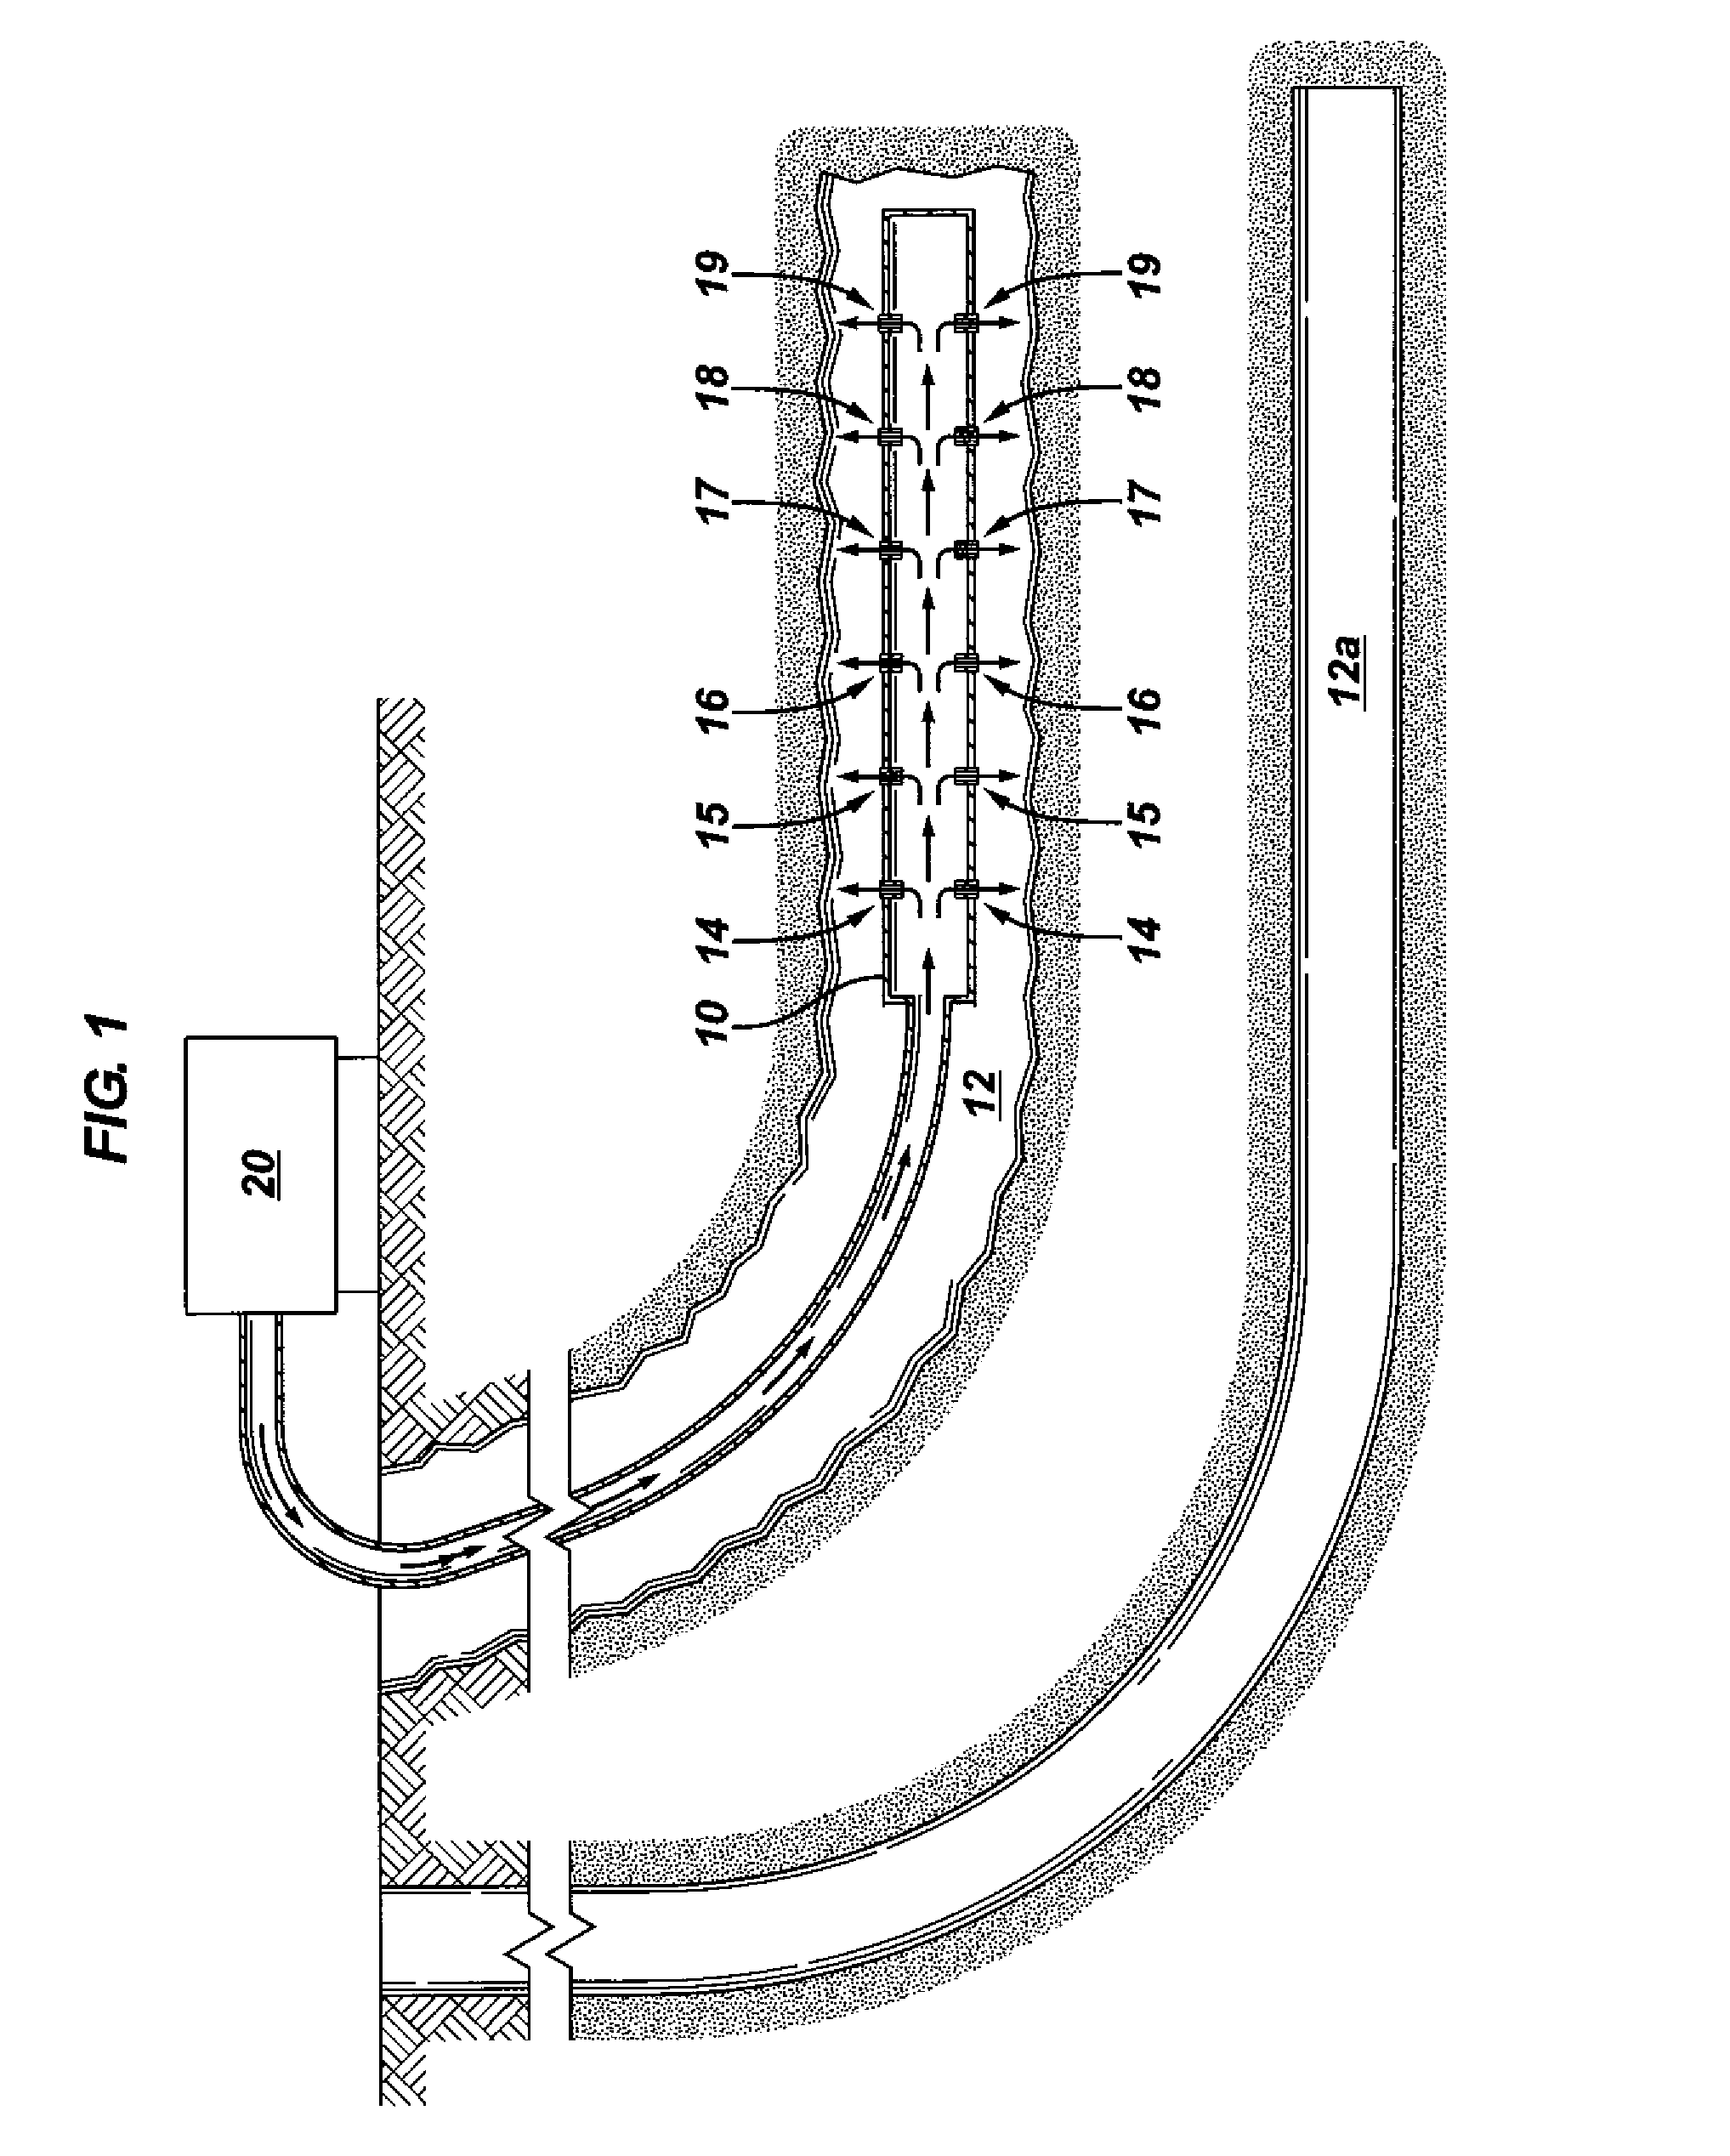 Steam injection apparatus for steam assisted gravity drainage techniques